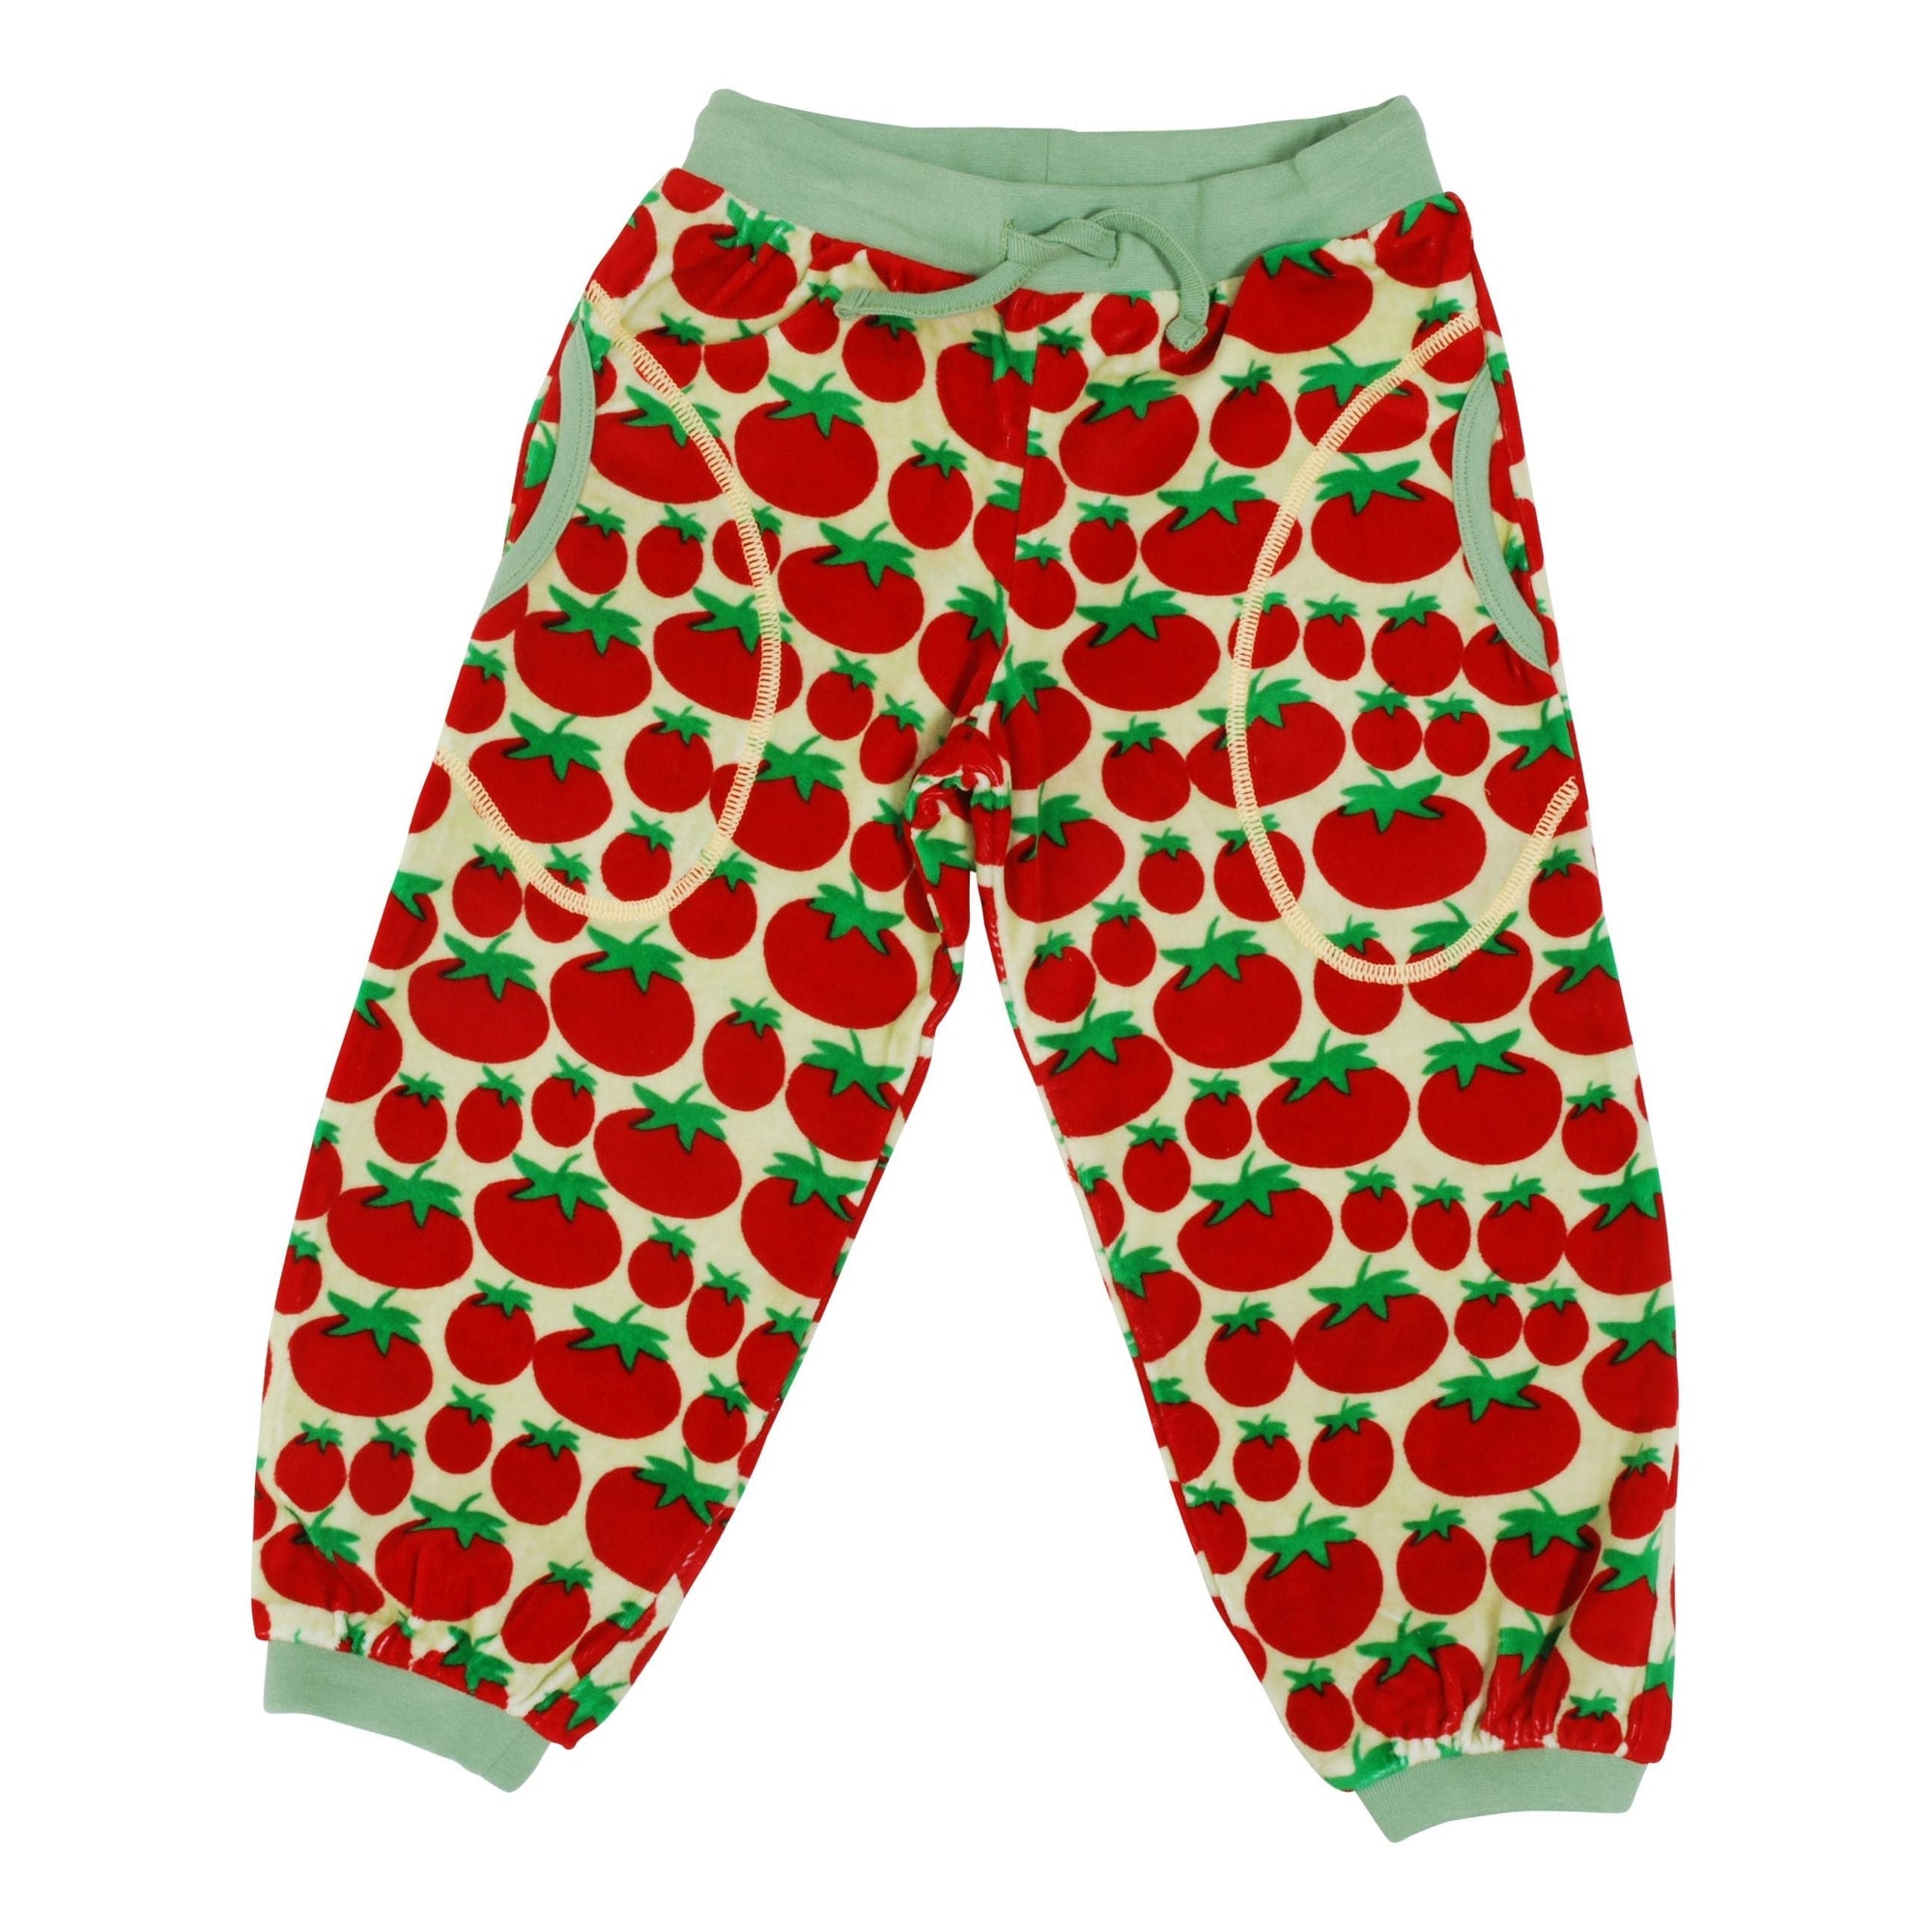 Tomato Velour Pants - 2 Left Size 10-12 & 12-14 years-Duns Sweden-Modern Rascals